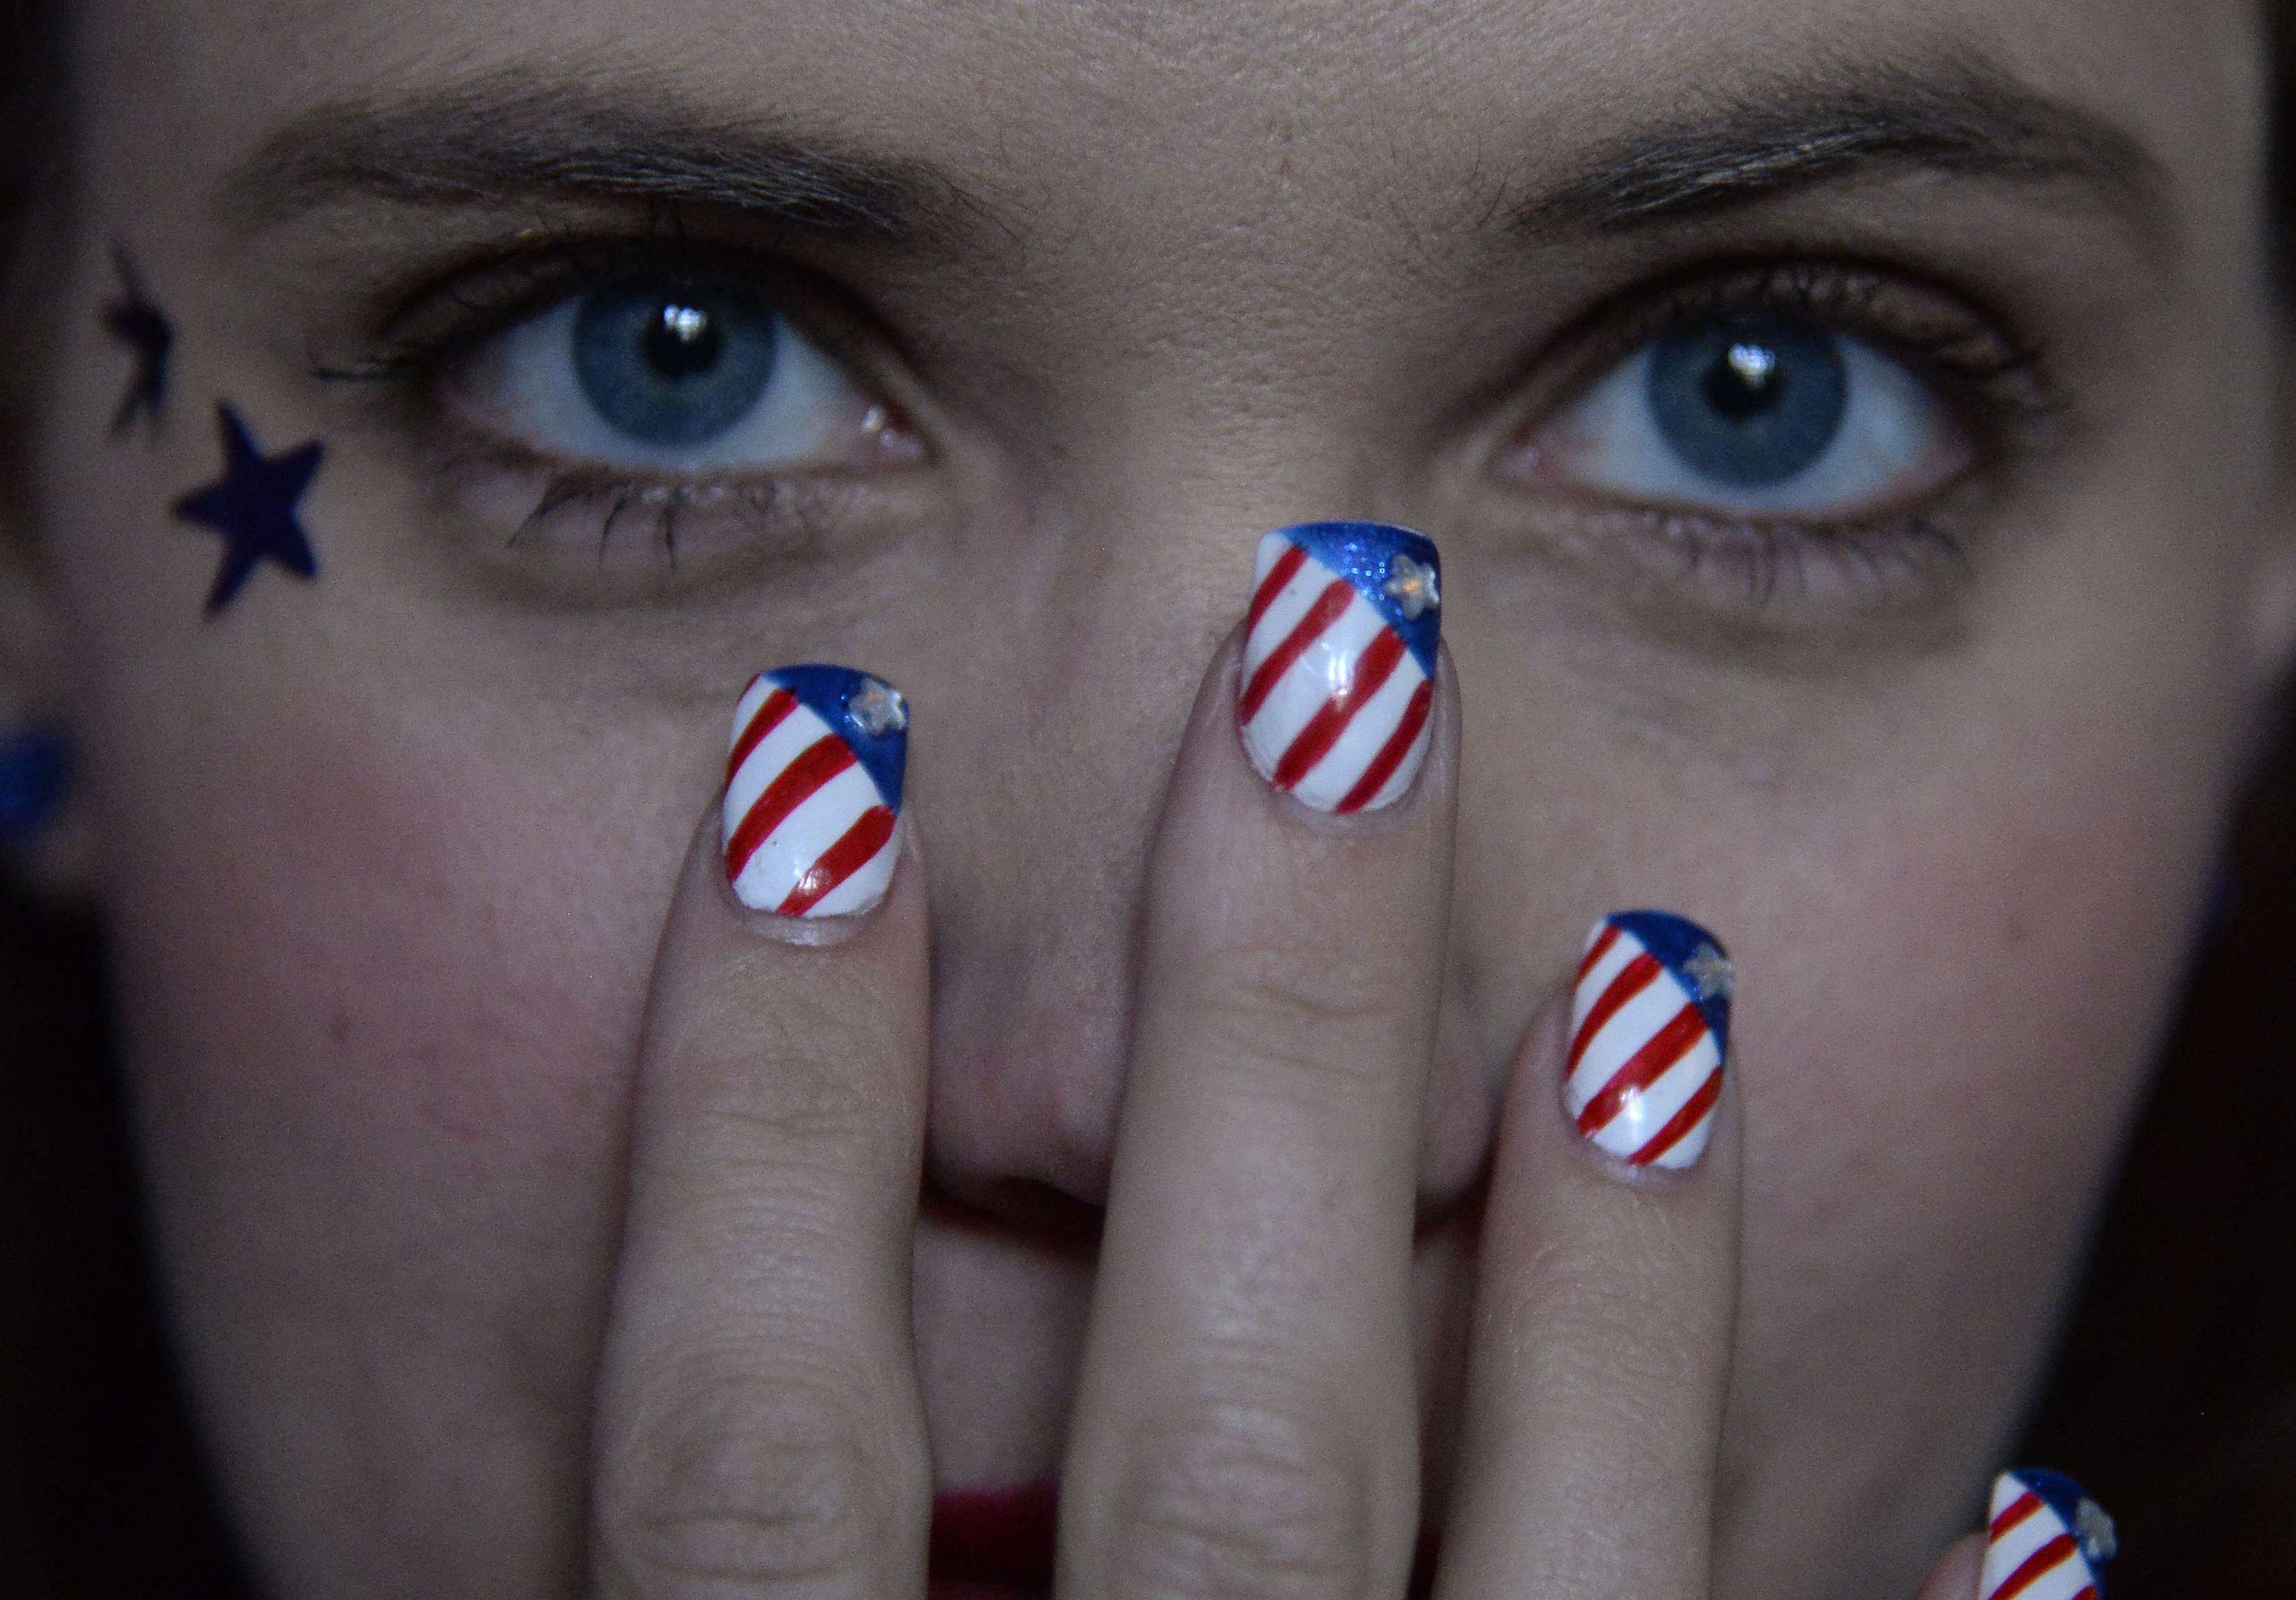 Tarayn Svalverg had her nails painted special for this game as fans gather at The Three Lions, USA on July 1, 2014.